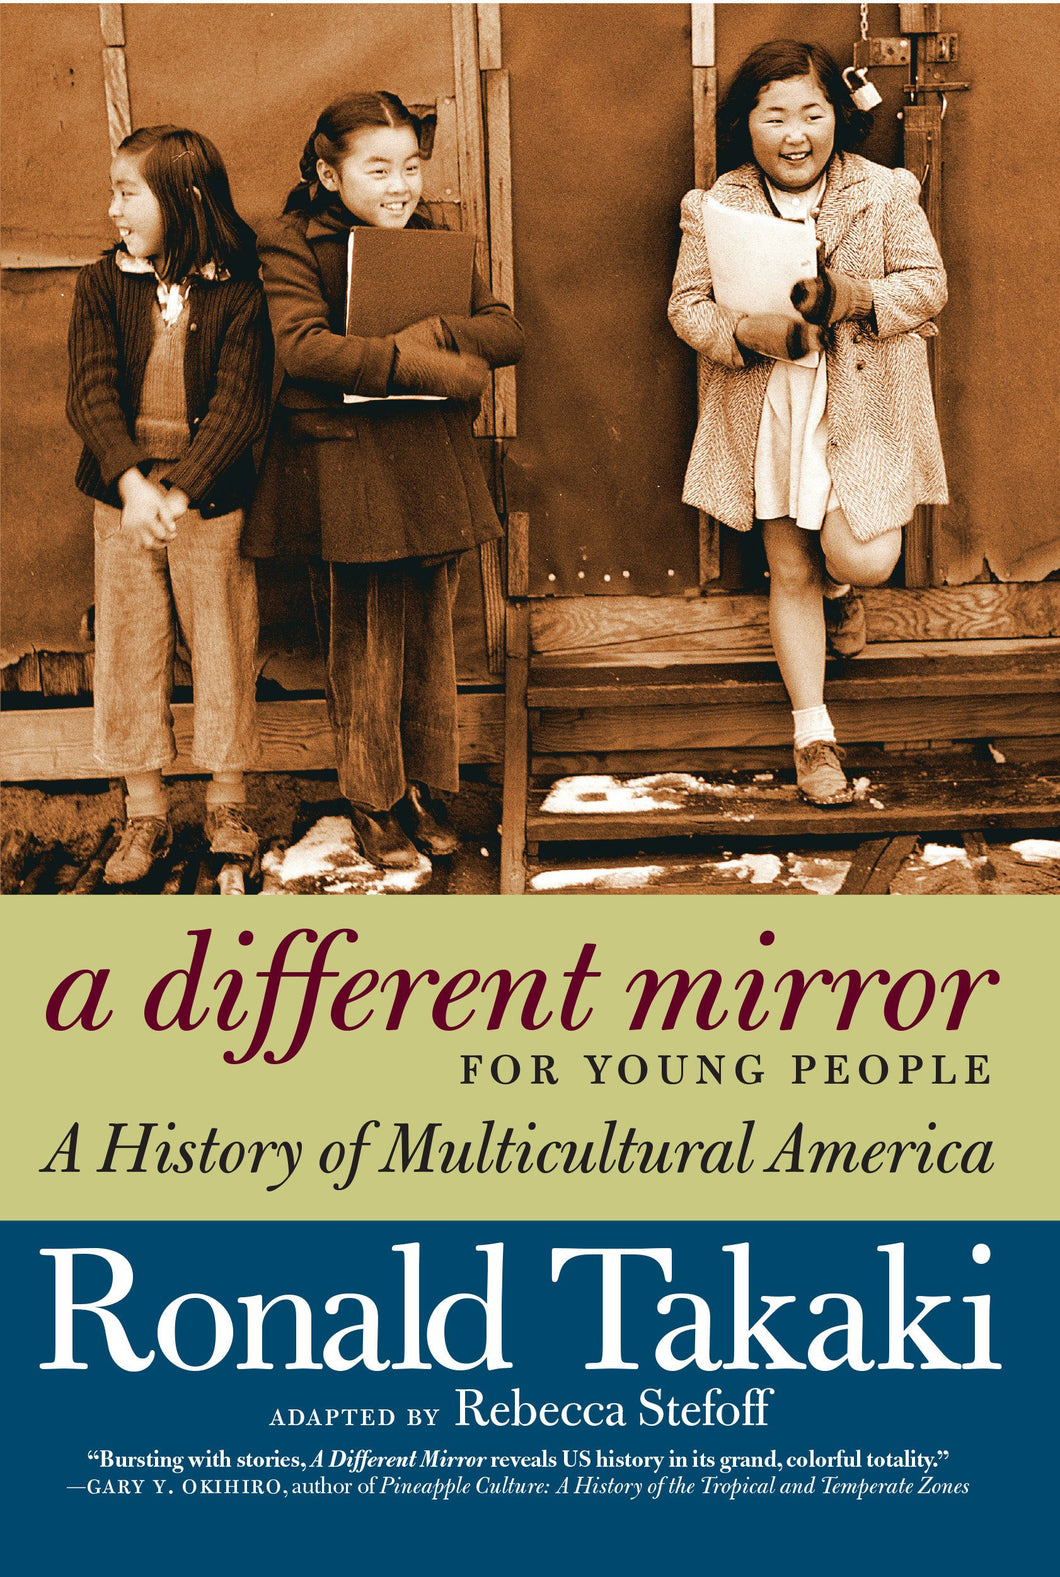 A Different Mirror for Young People: A History of Multicultural America by Rebecca Stefoff, Ronald Takaki